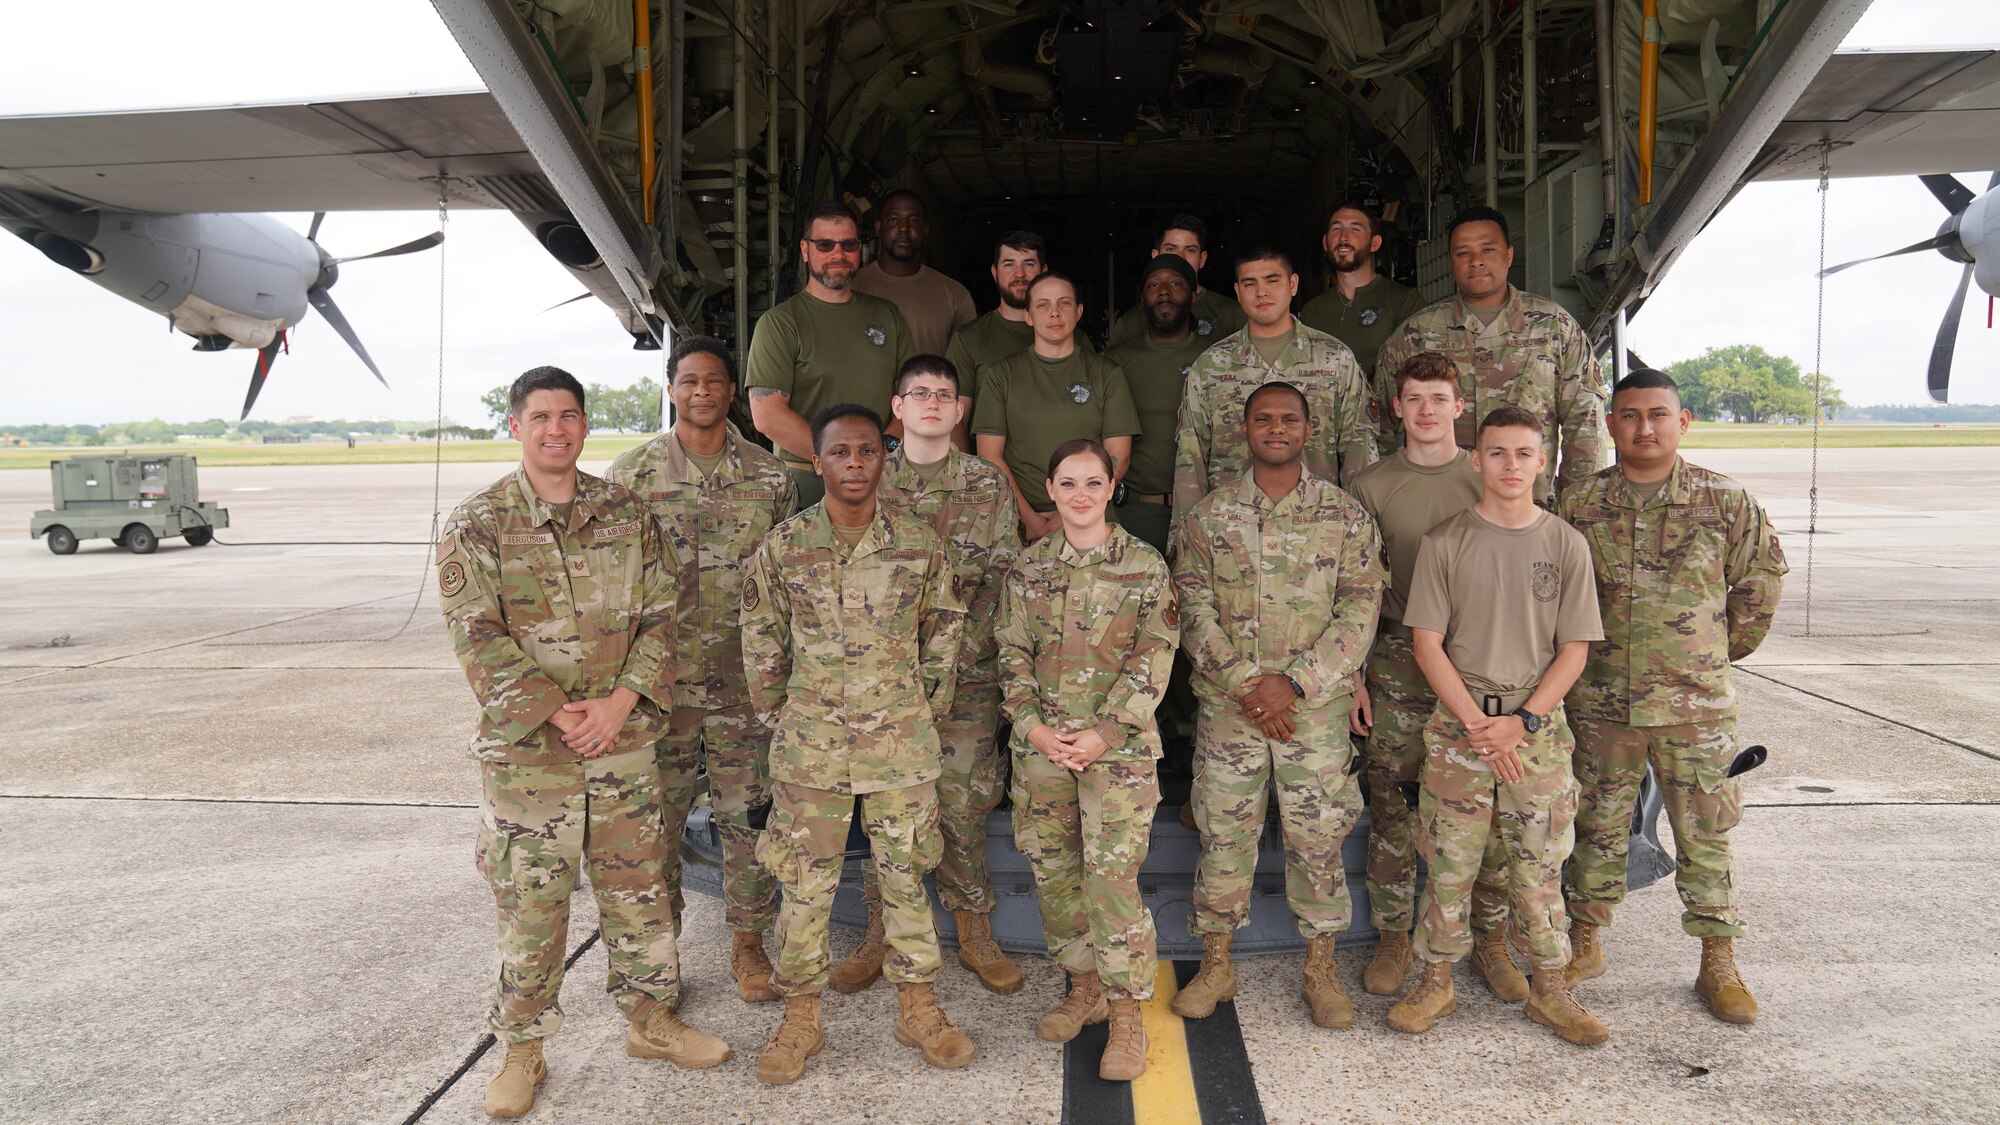 Members of the 81st Security Forces Squadron and the Biloxi Special Weapons and Tactics team gather for a photo at Keesler Air Force Base, Mississippi, May 9, 2022. Security forces and Biloxi SWAT members trained together on aircraft anti-hijacking procedures.